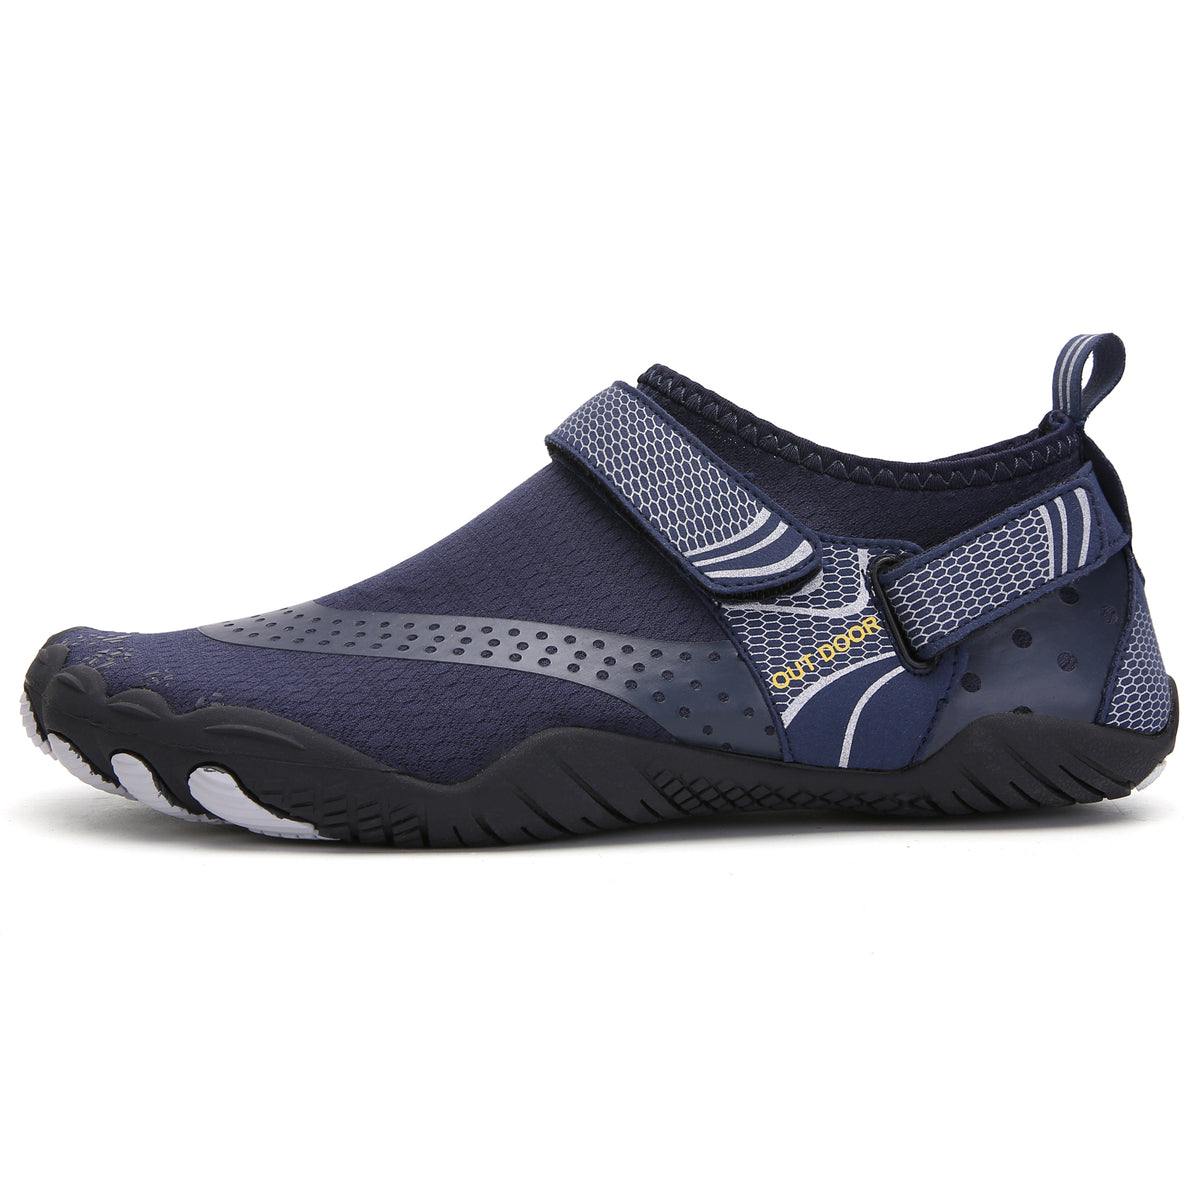 Women's beach shoes with Velcro – sixspace